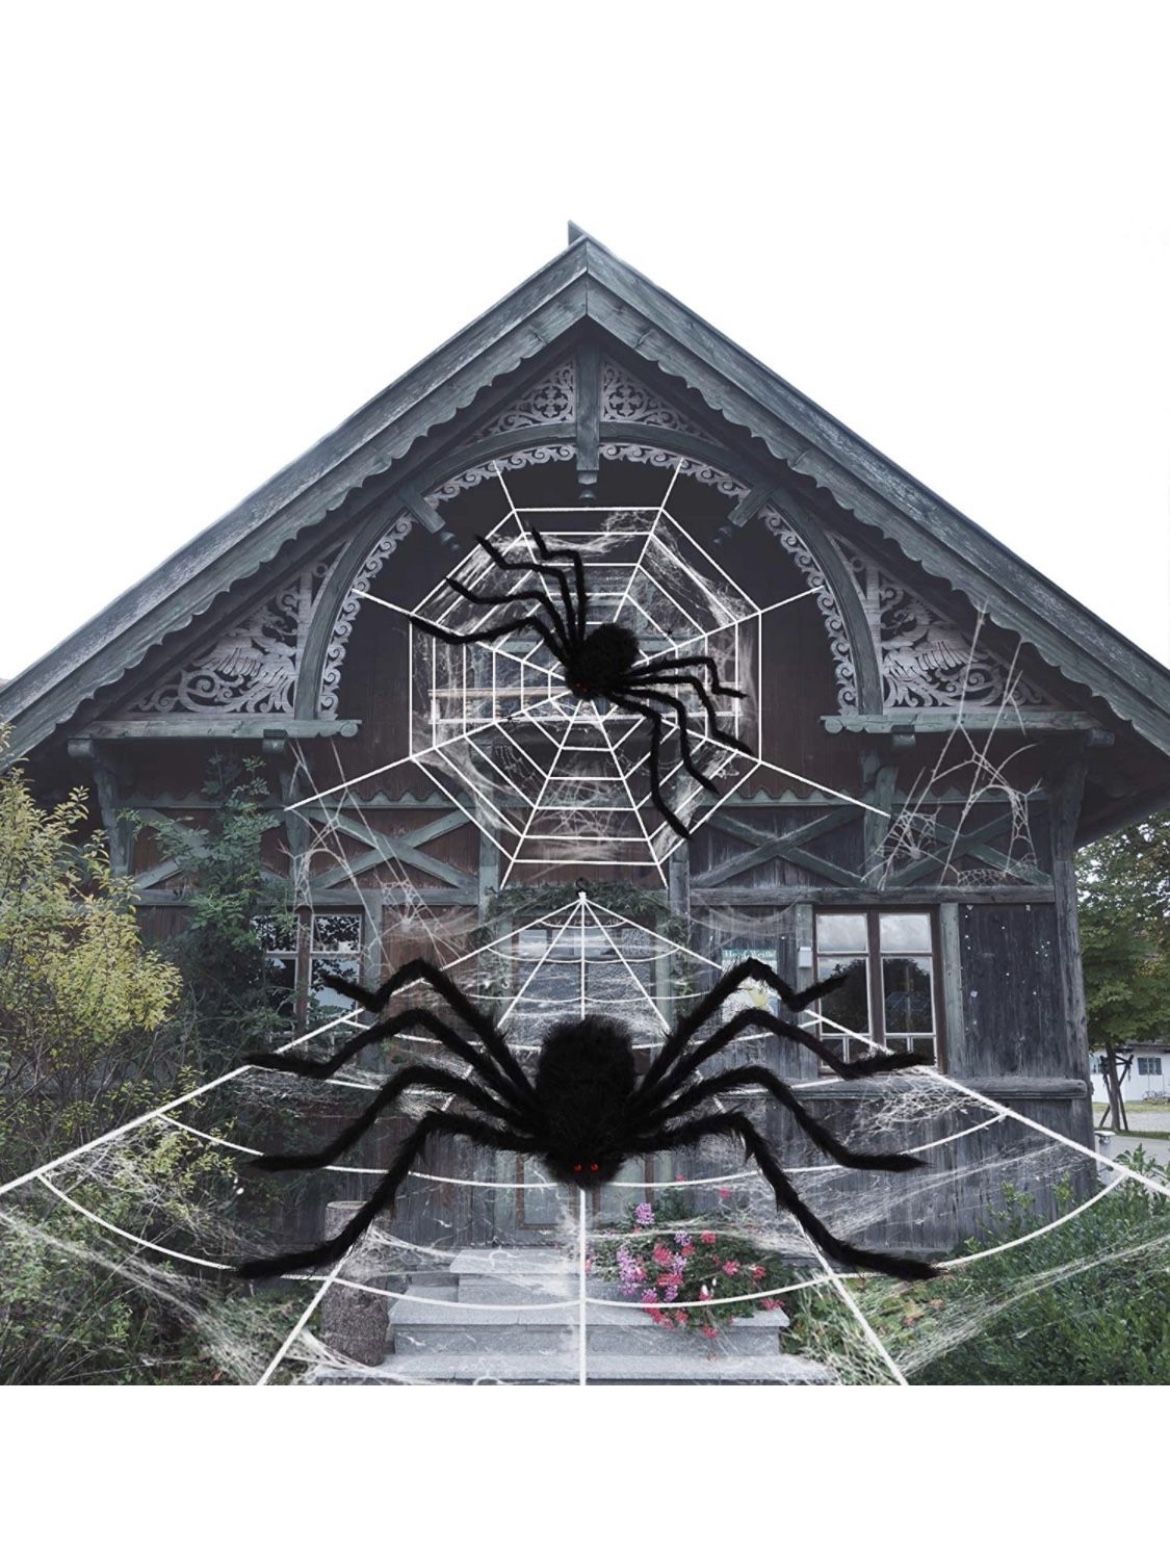 Halloween Decorations, 2 Scary Spiders and 2 Giant Spider Web with Super Stretch Cobweb